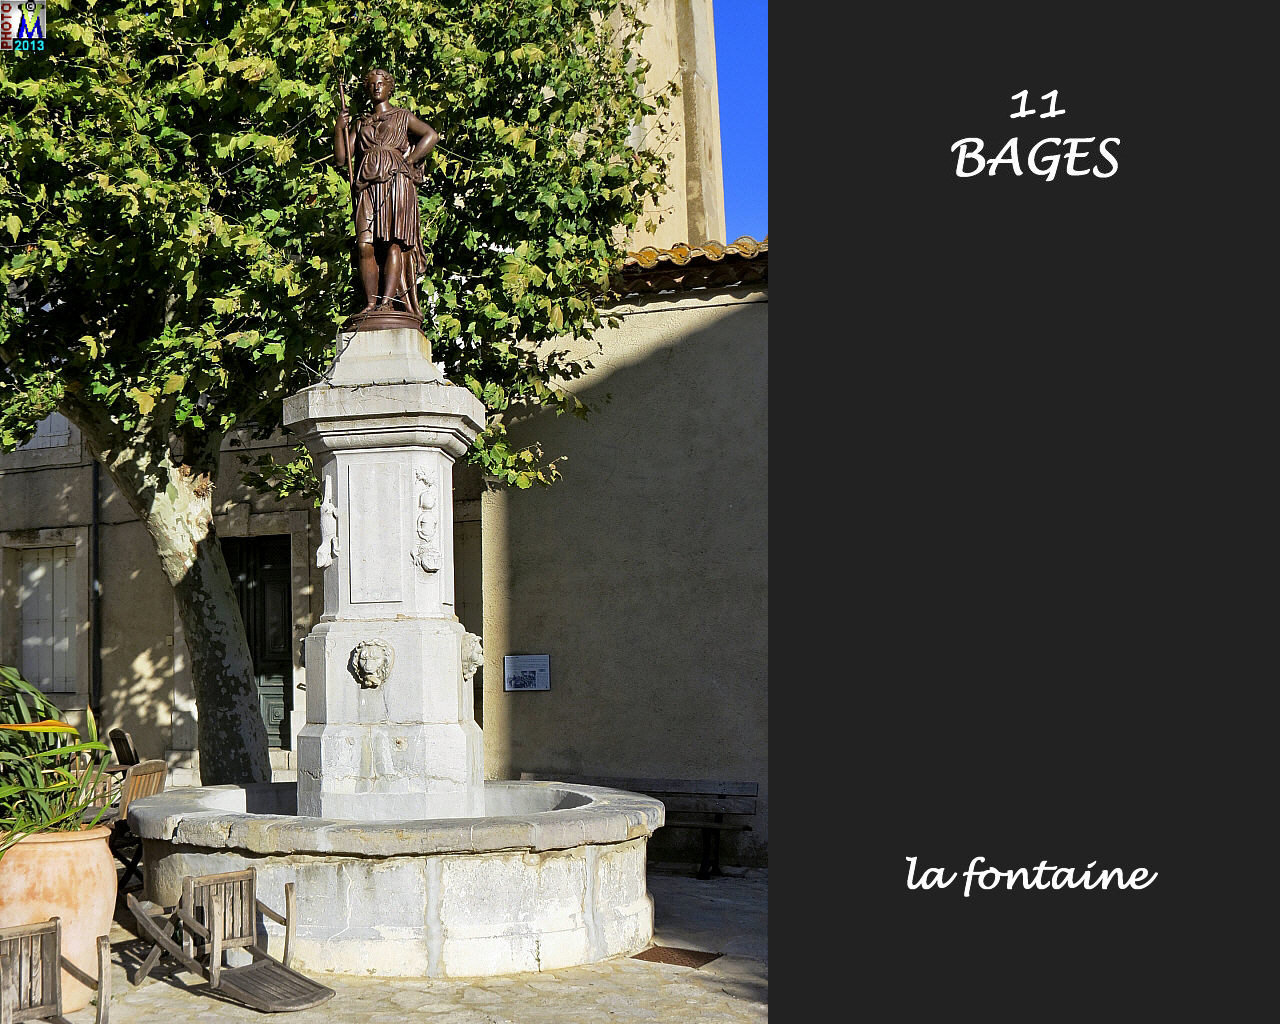 11BAGES_fontaine_100.jpg